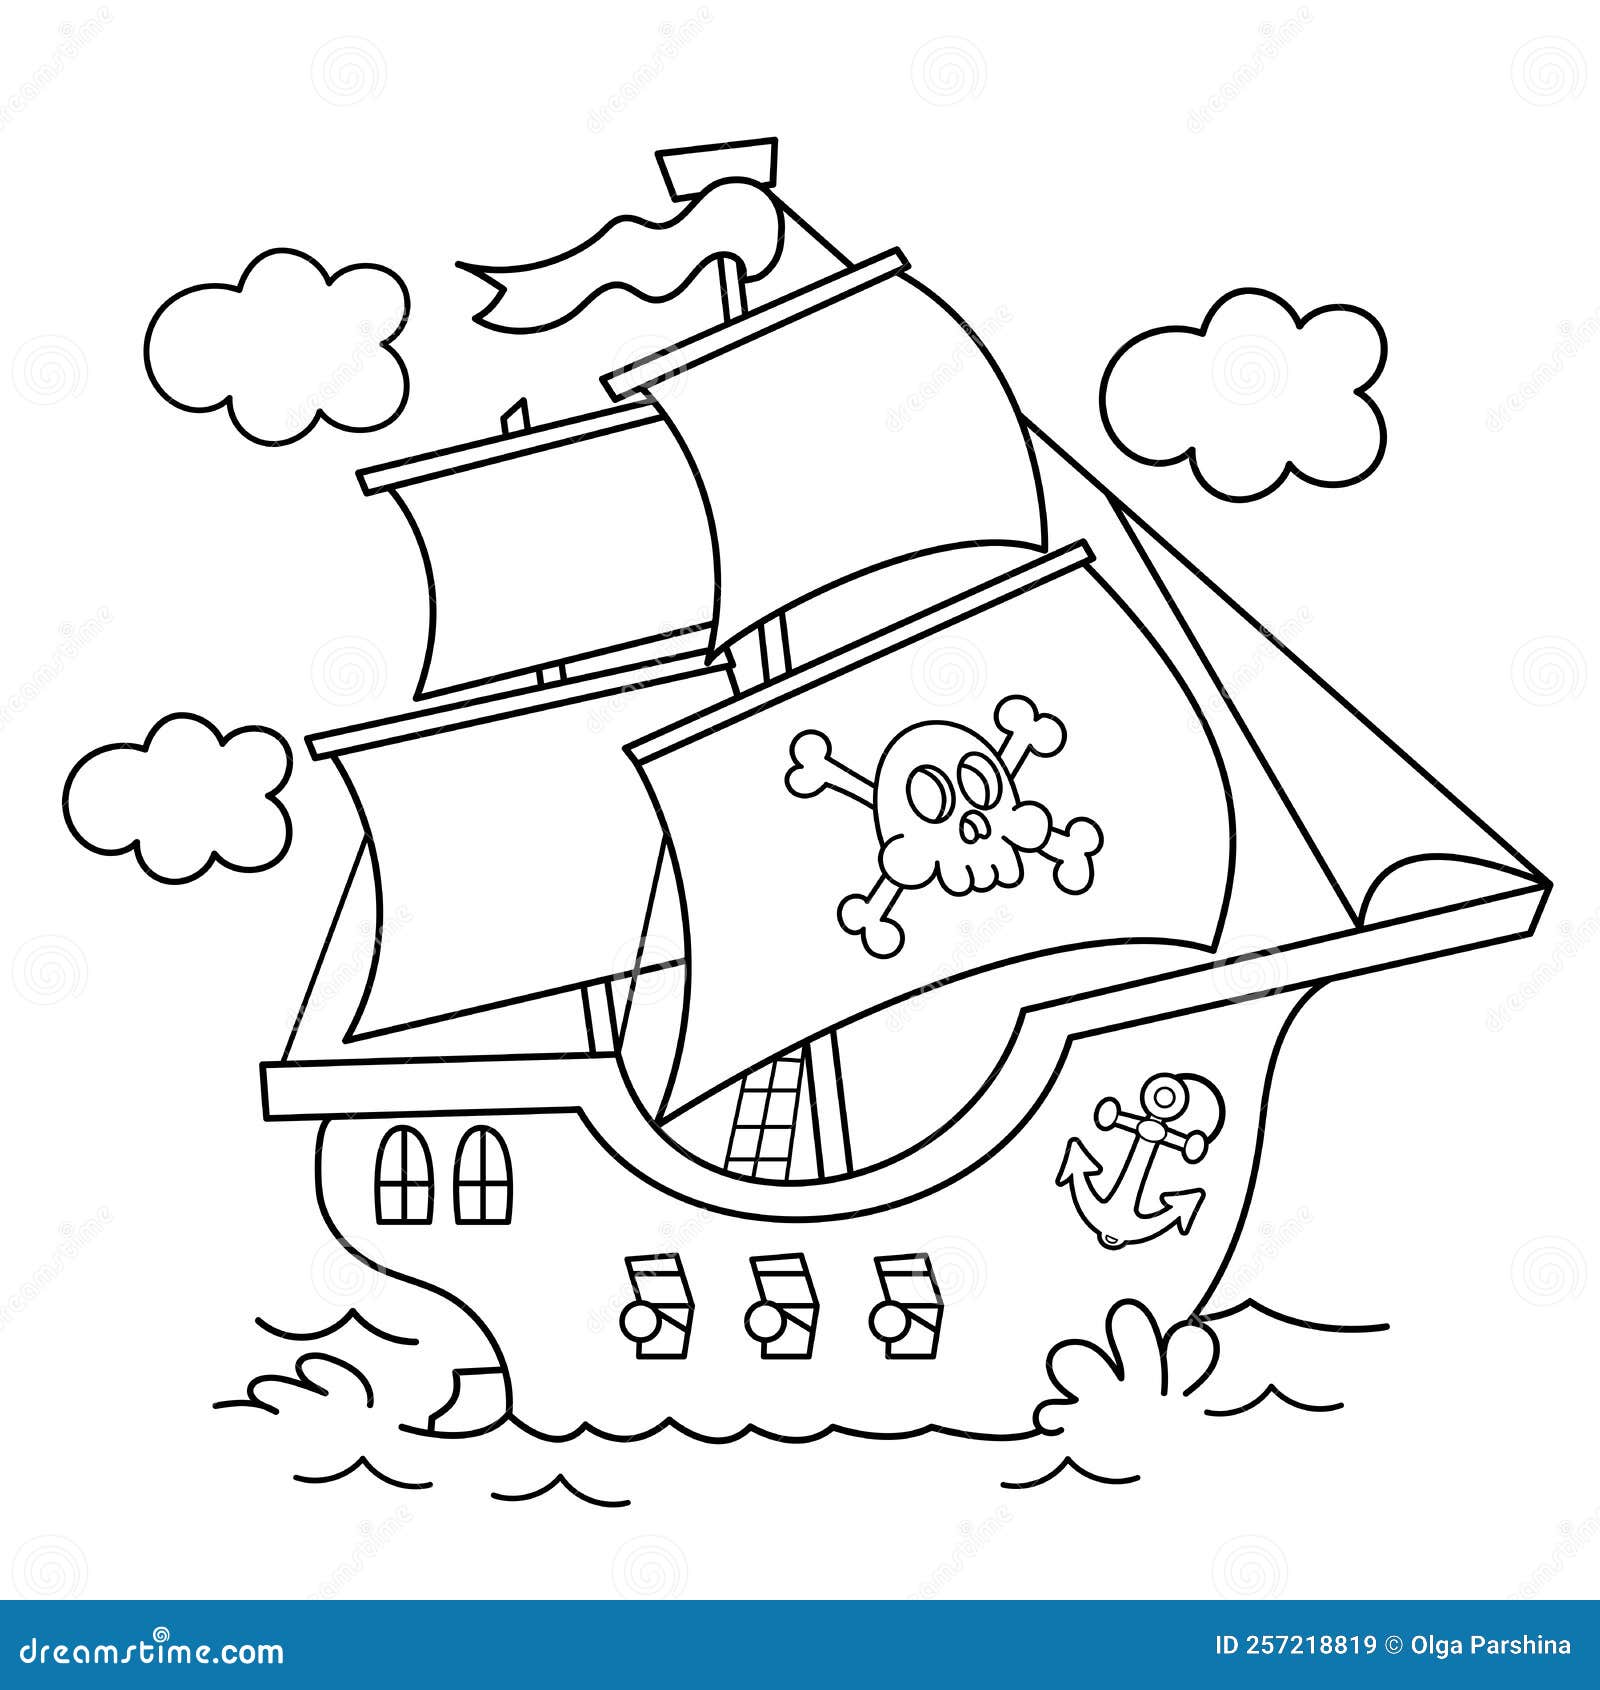 How to Draw a Ship for Kids (Boats and Ships) Step by Step |  DrawingTutorials101.com